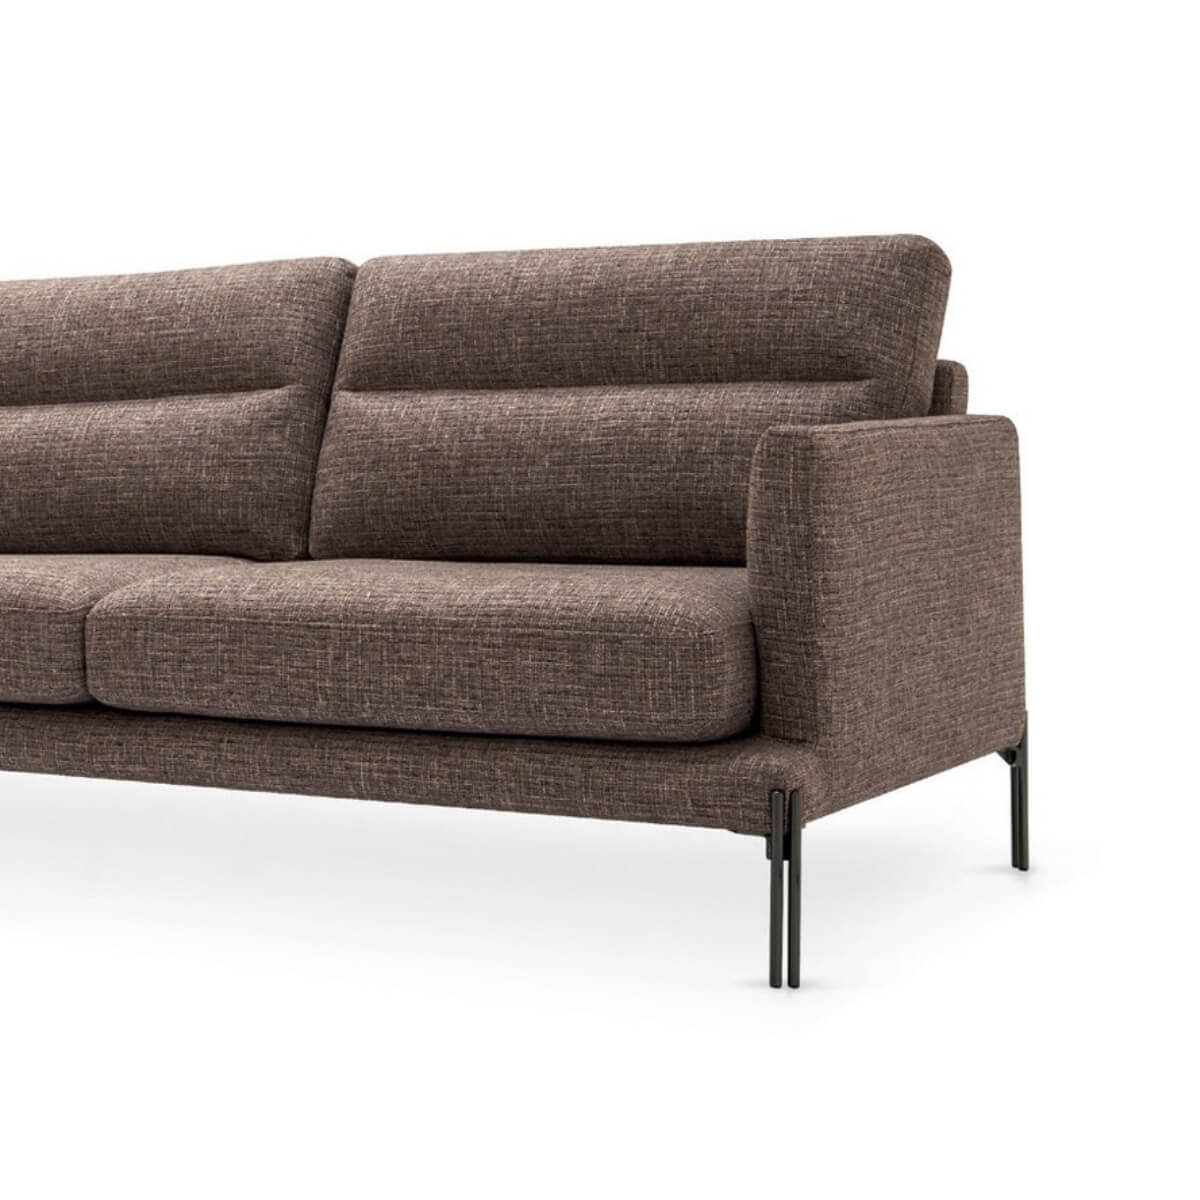 DreamWave Cotton Linen Sofa - A symphony of comfort and style